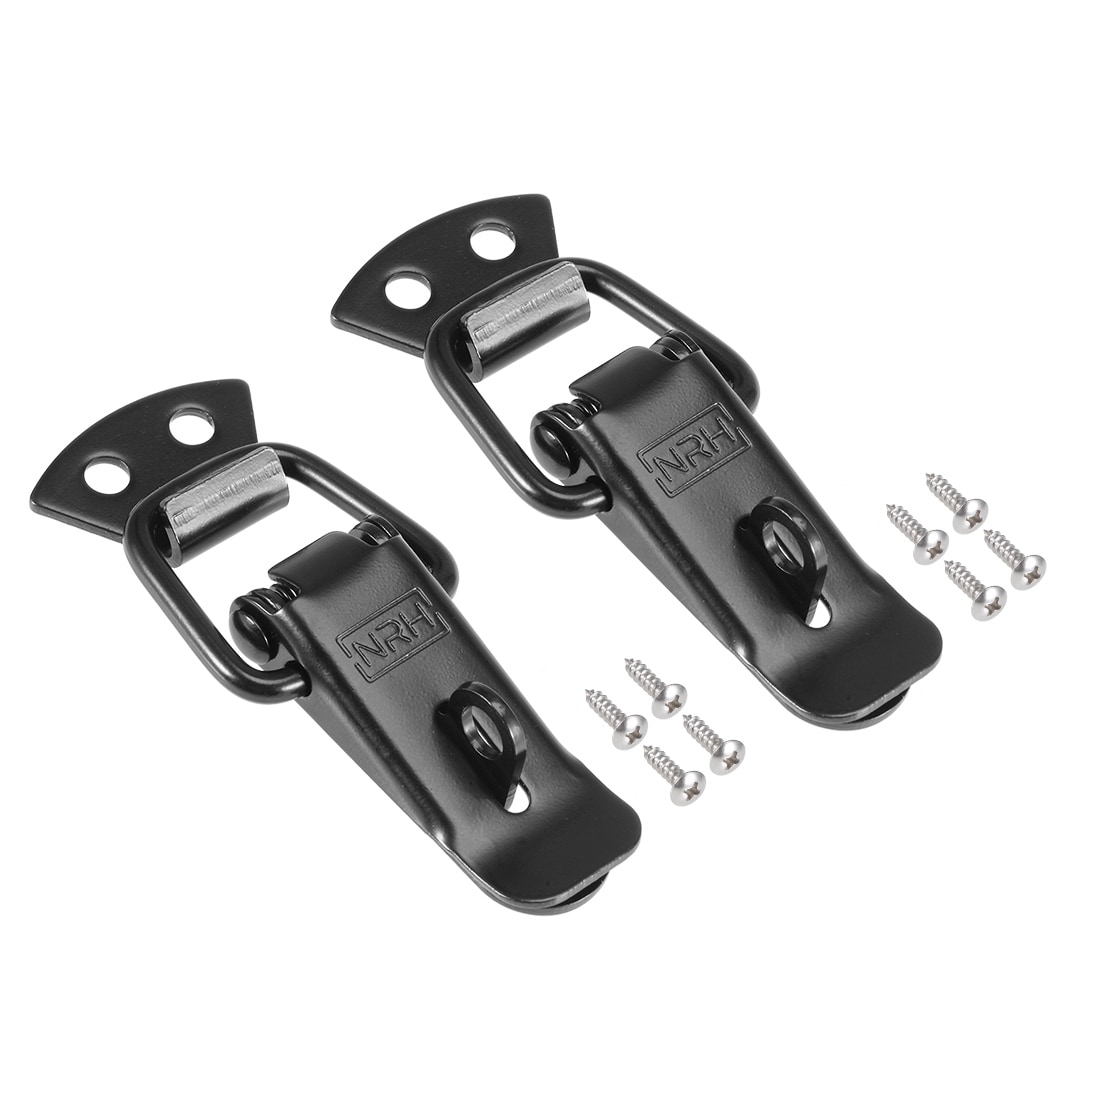 Spring Loaded Toggle Latch Hasp, Duck Billed Buckles Catch Clamp